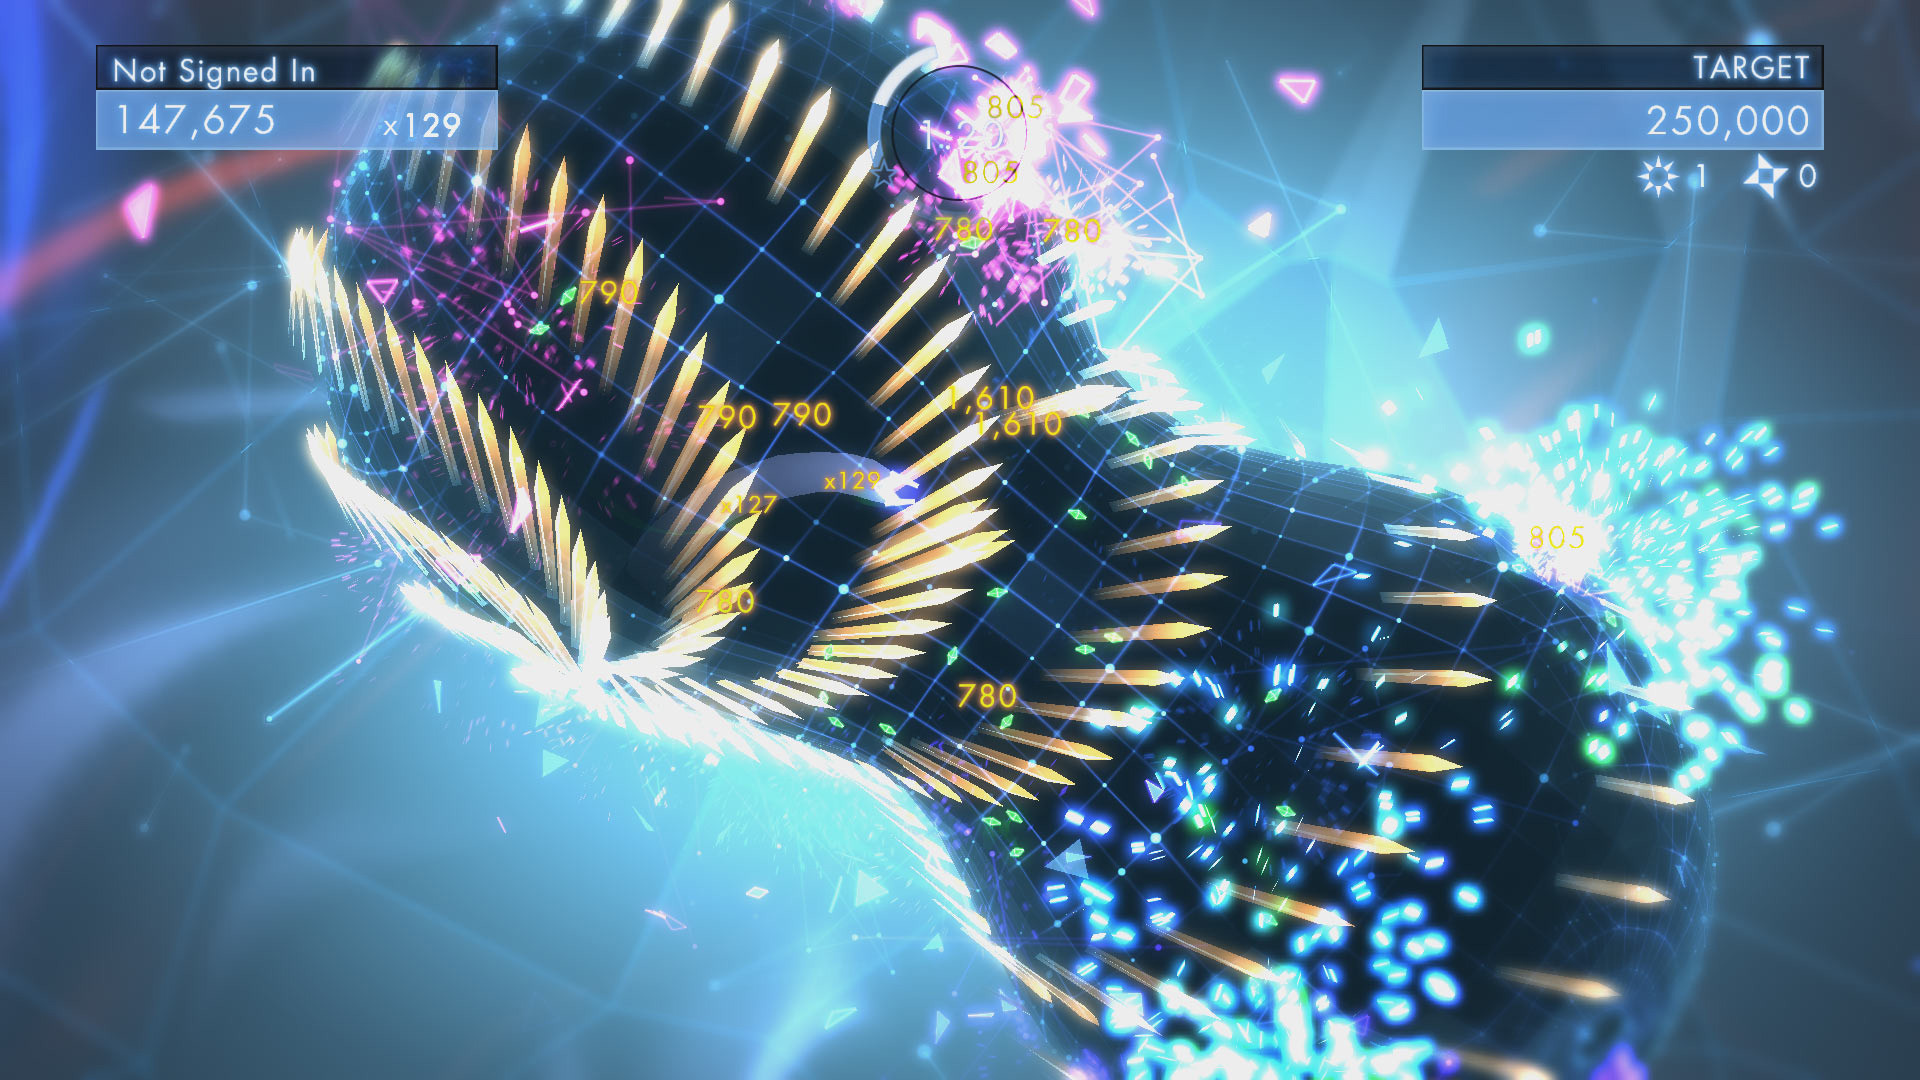 Geometry Wars 3: Dimensions (PS3 / PlayStation 3) Game Profile | News